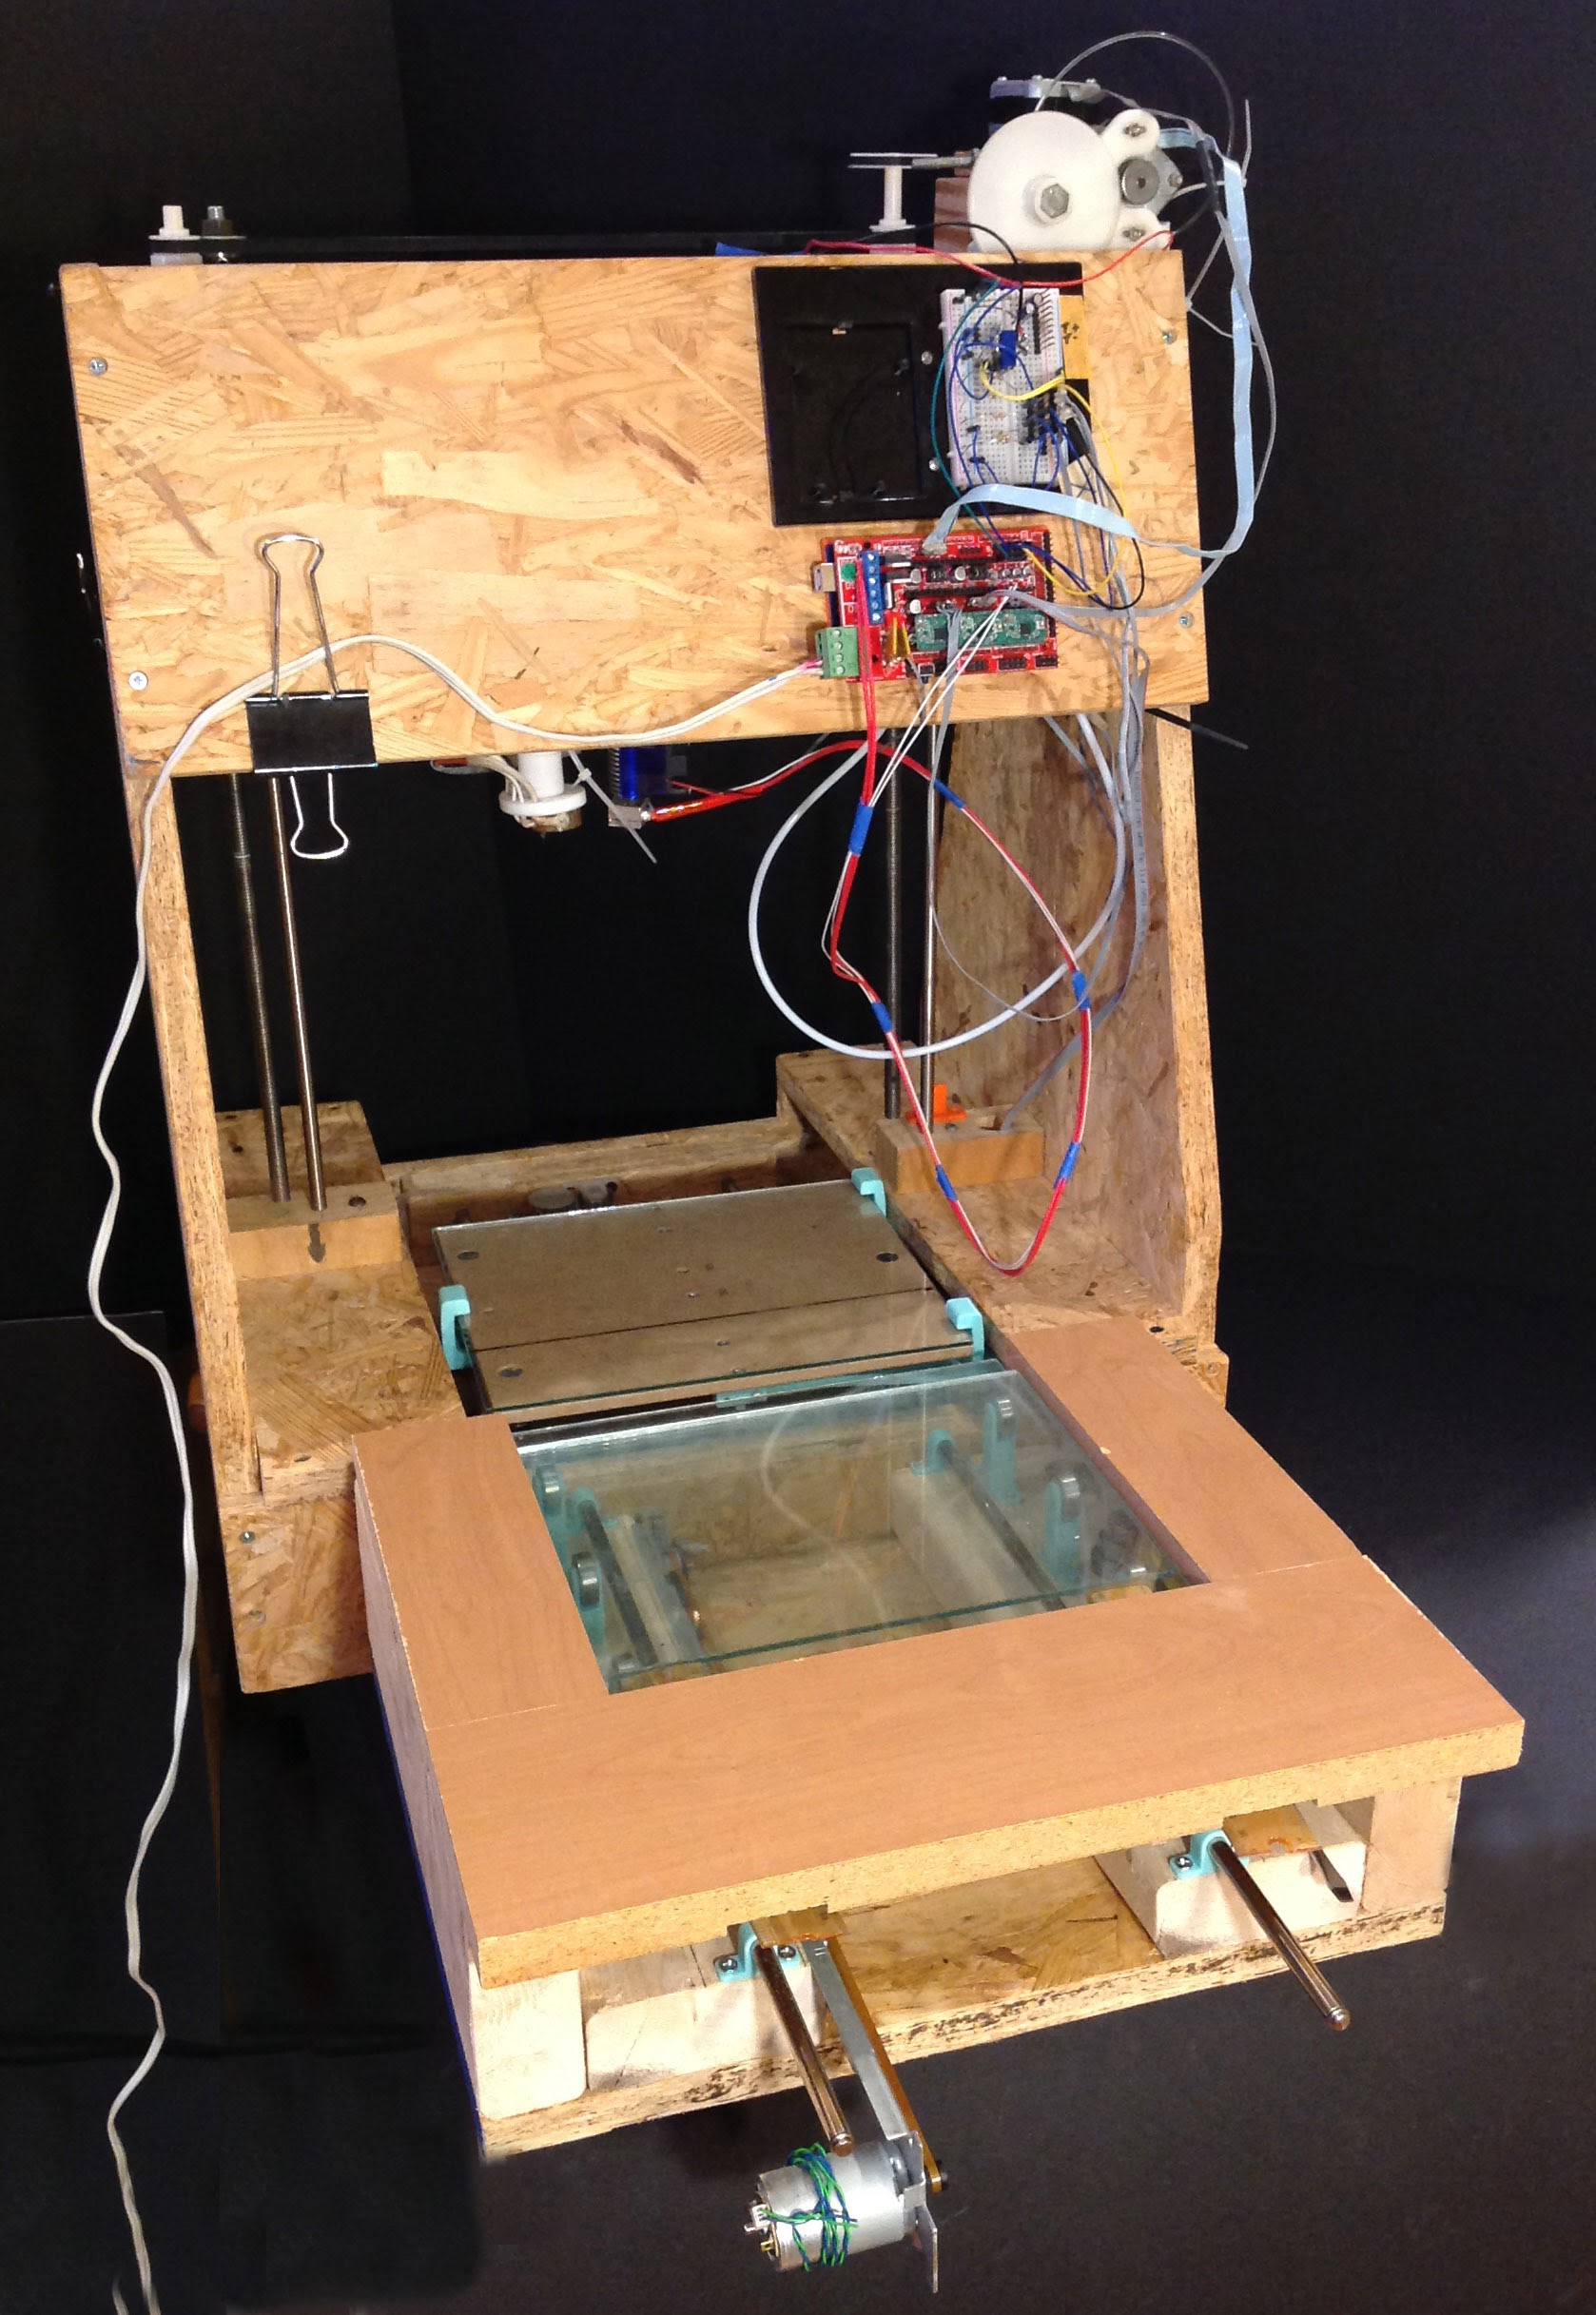 3D MultiPrinter: Automated Additive Manufacturing